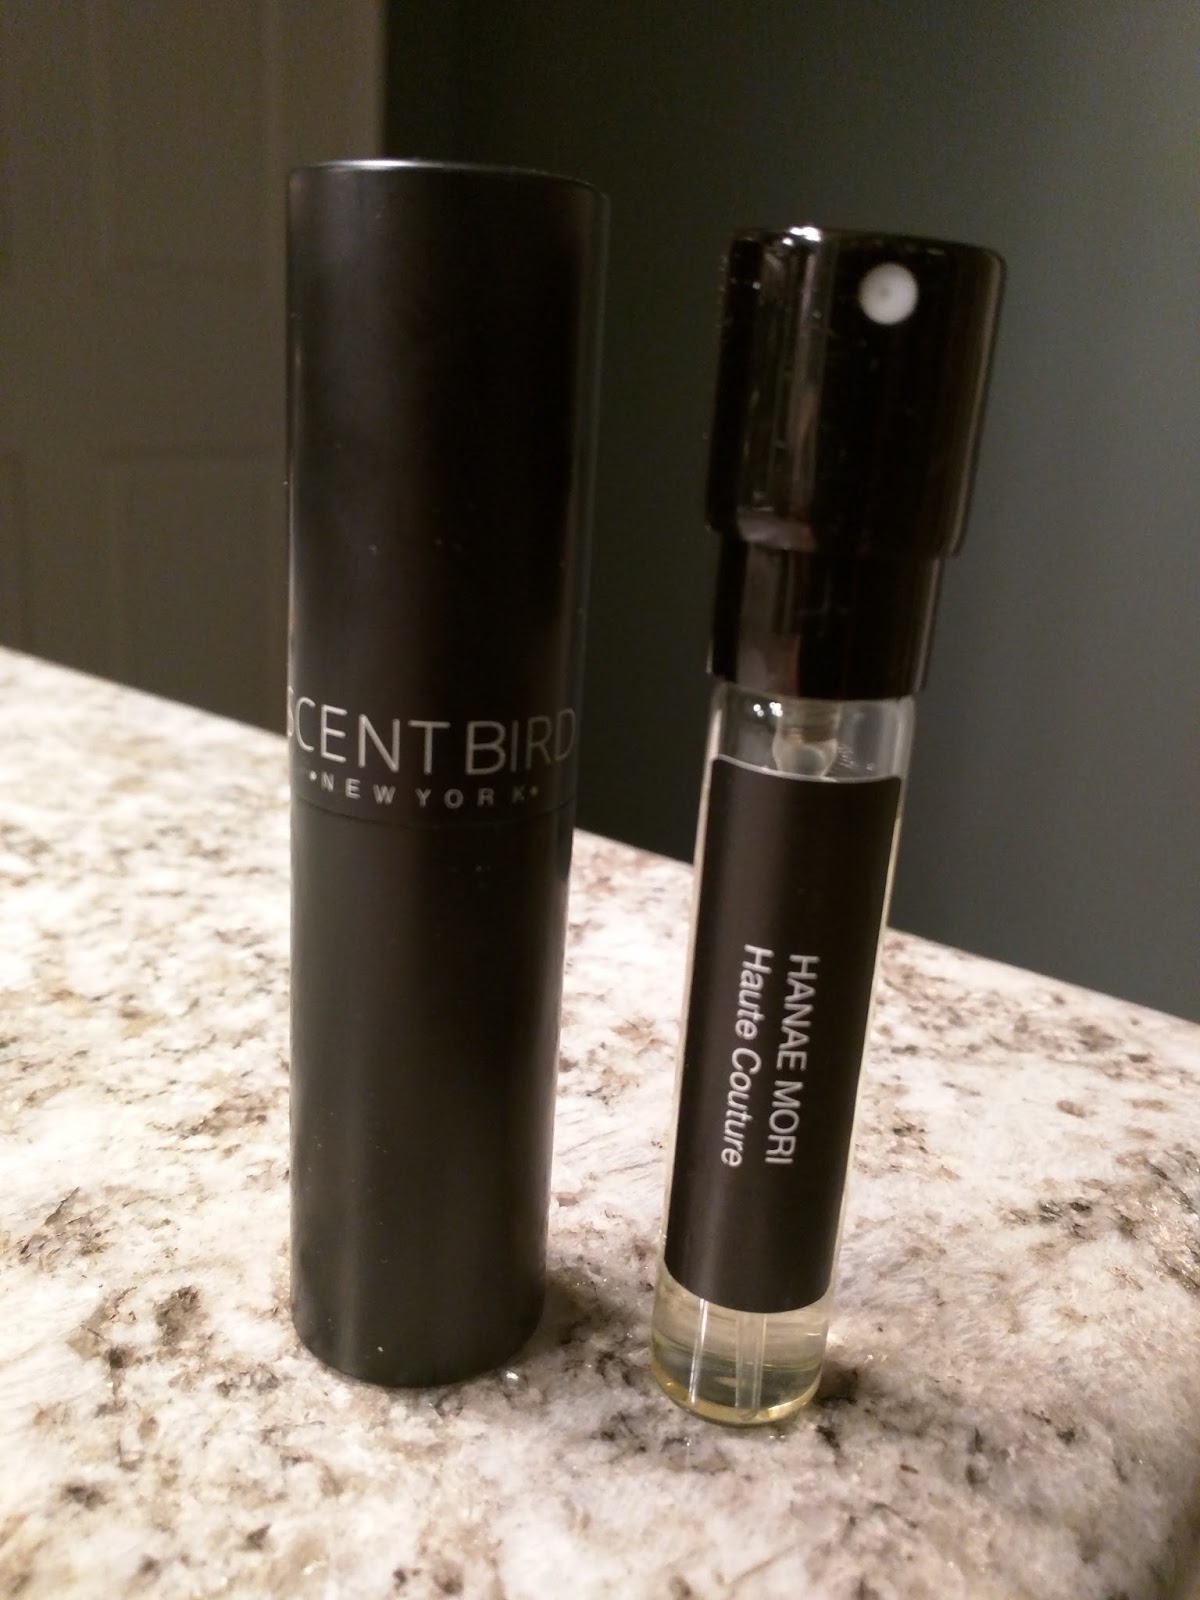 Scentbird Perfume Subscription Review